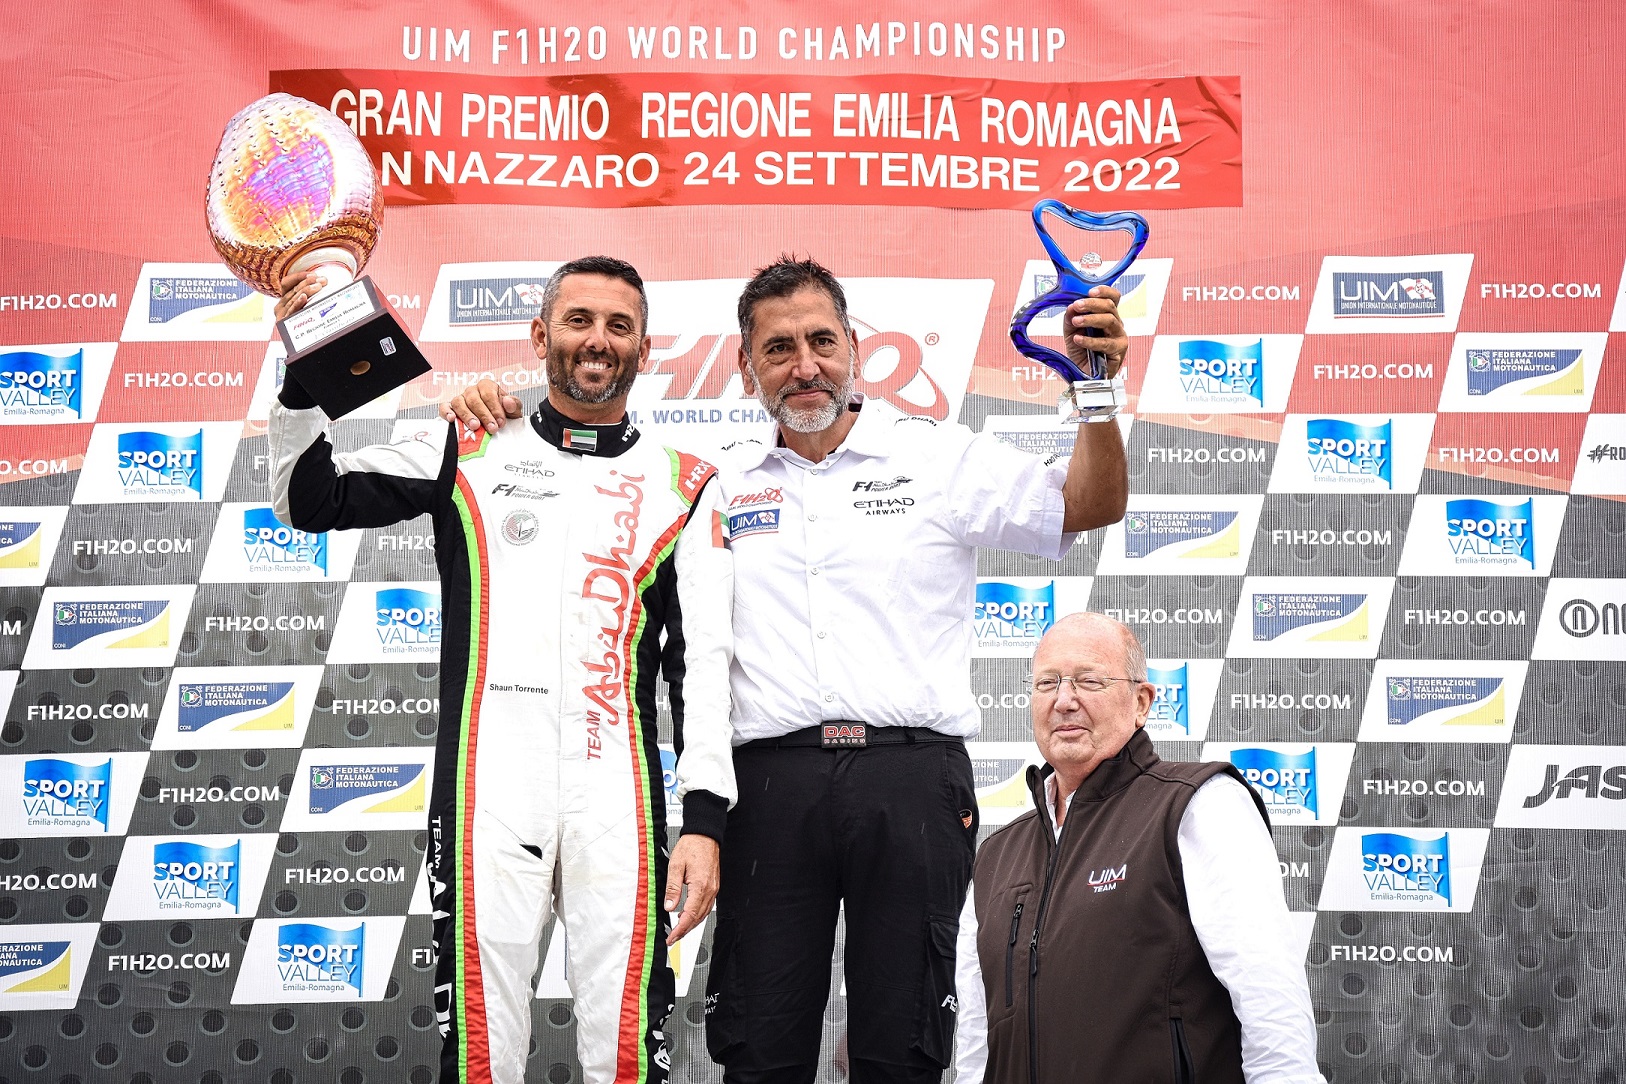 Team Abu Dhabi duo ready for big  world title battle in Italy     Torrente, Al Qemzi – rivals and partners as F1H2O  series returns to Sardinia